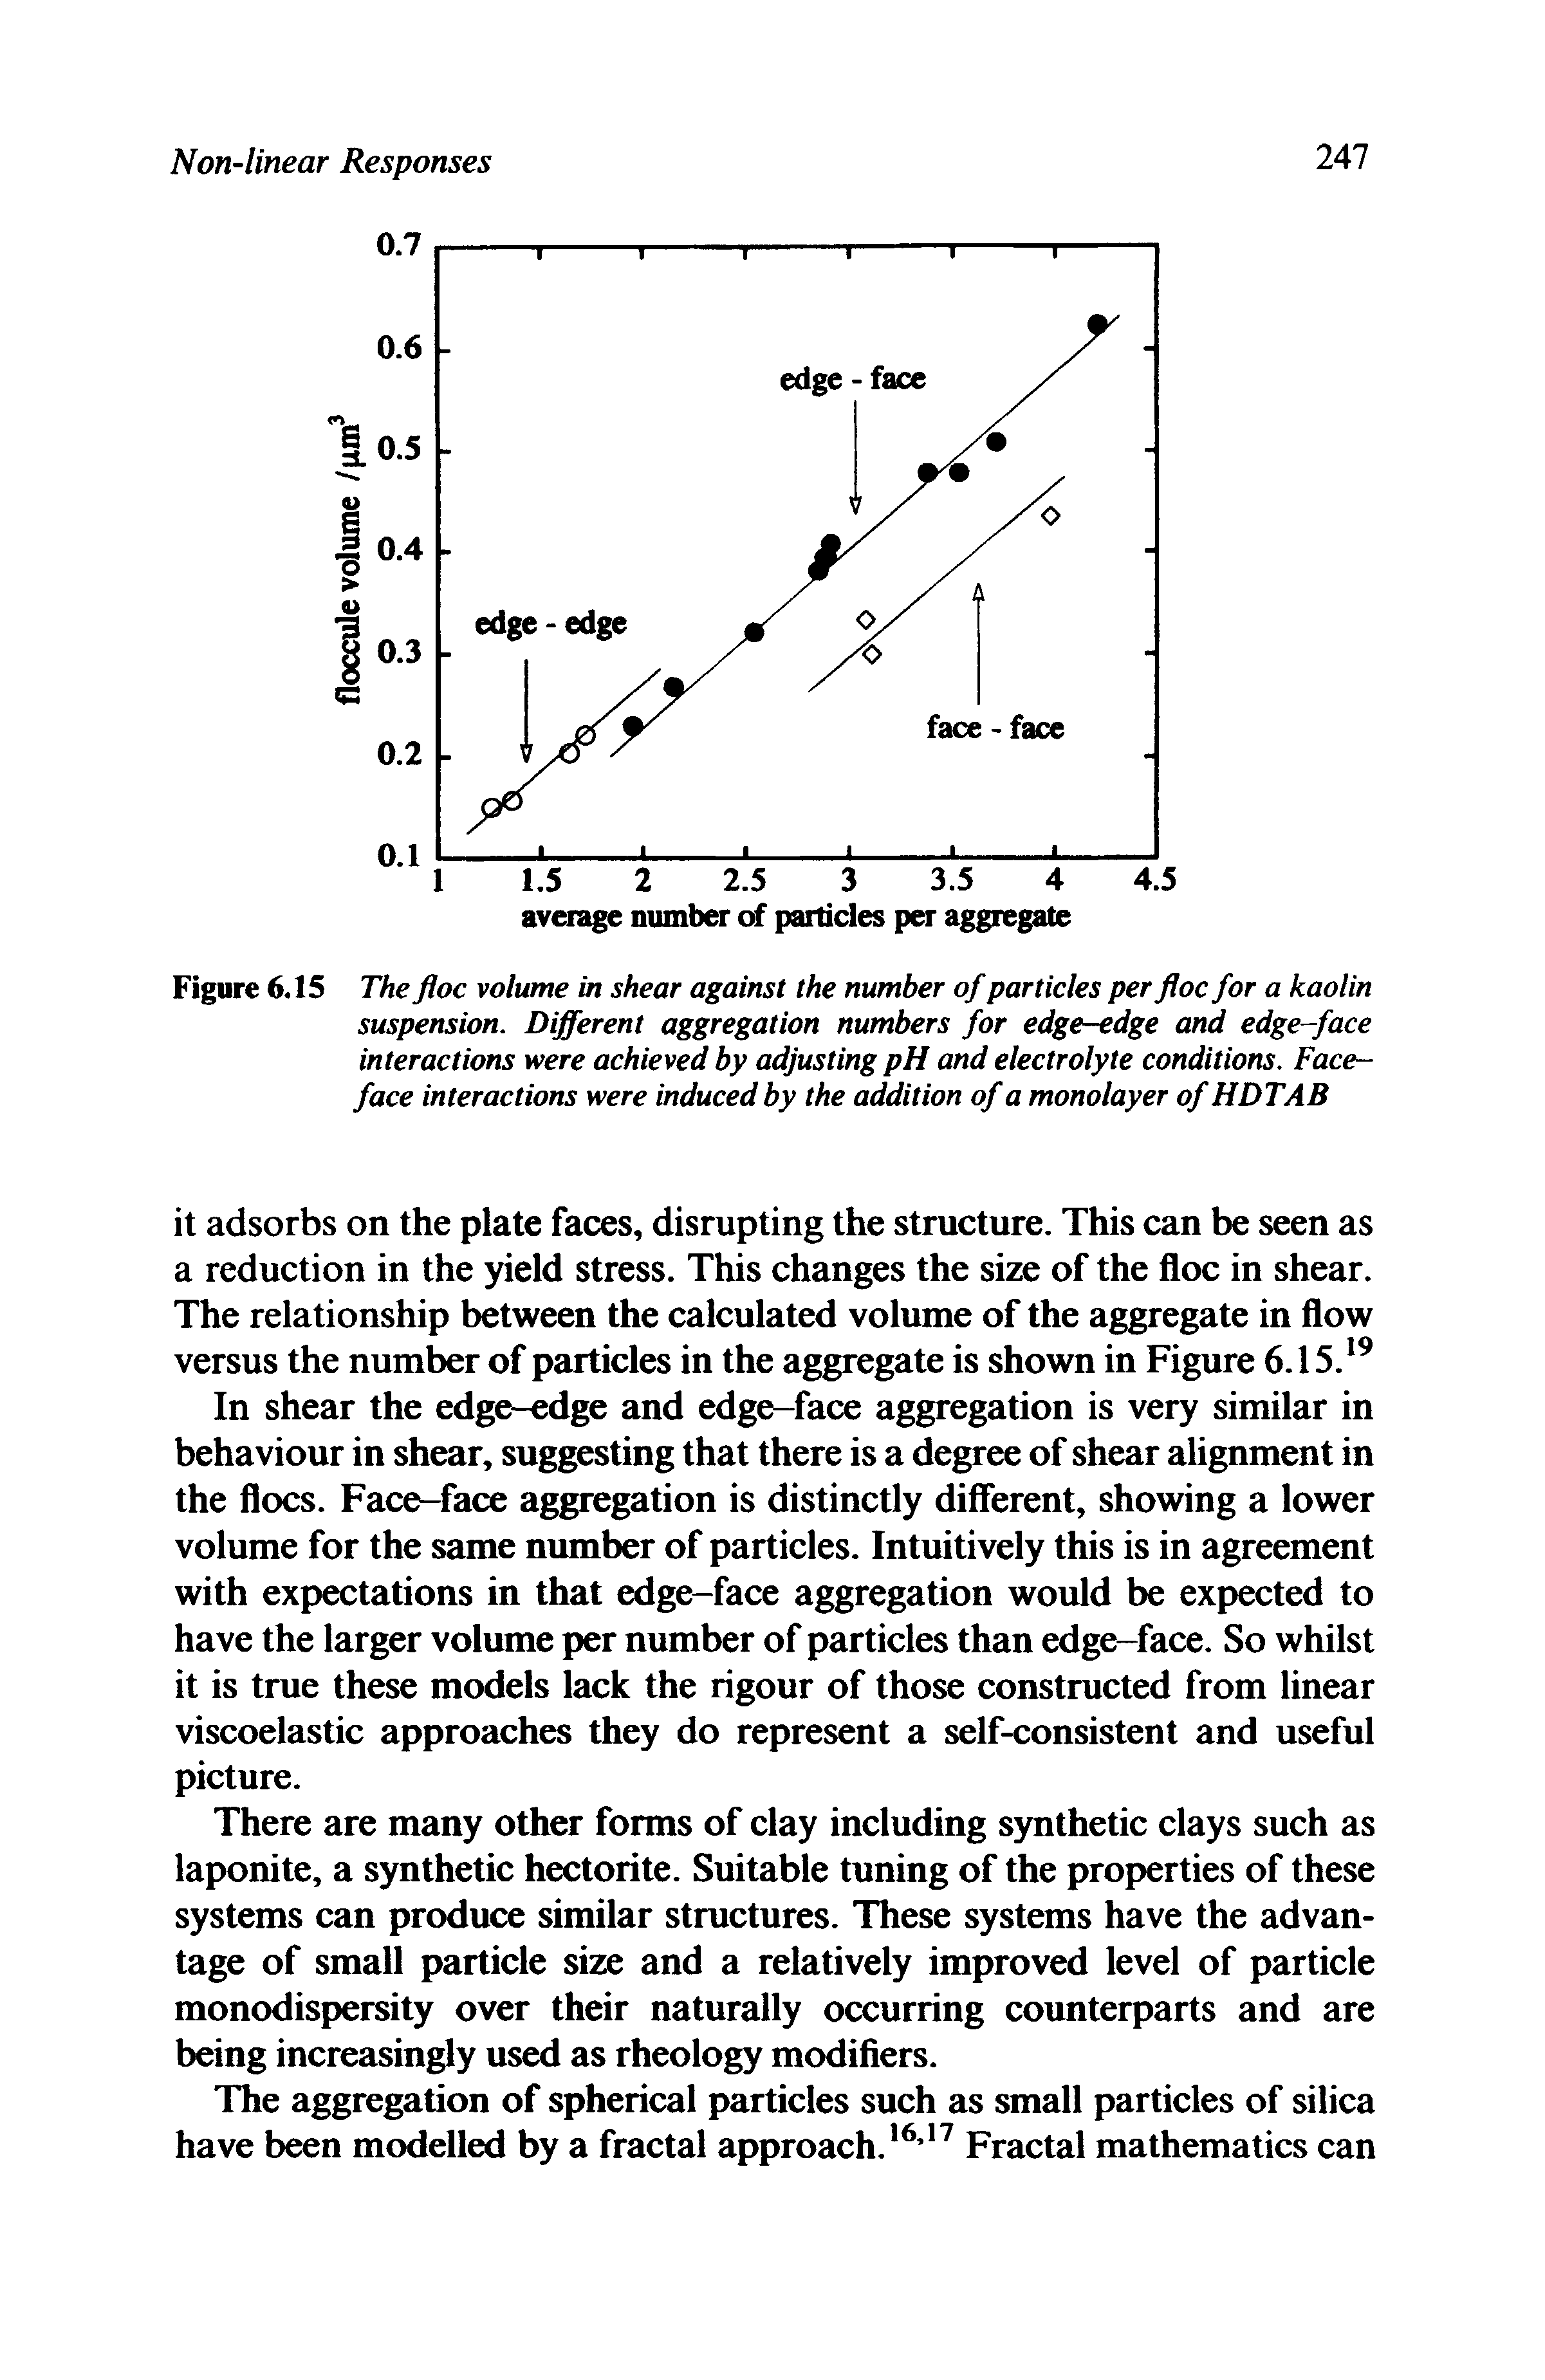 Figure 6.15 The floe volume in shear against the number of particles per floe for a kaolin suspension. Different aggregation numbers for edge-edge and edge-face interactions were achieved by adjusting pH and electrolyte conditions. Face-face interactions were induced by the addition of a monolayer of HDTAB...